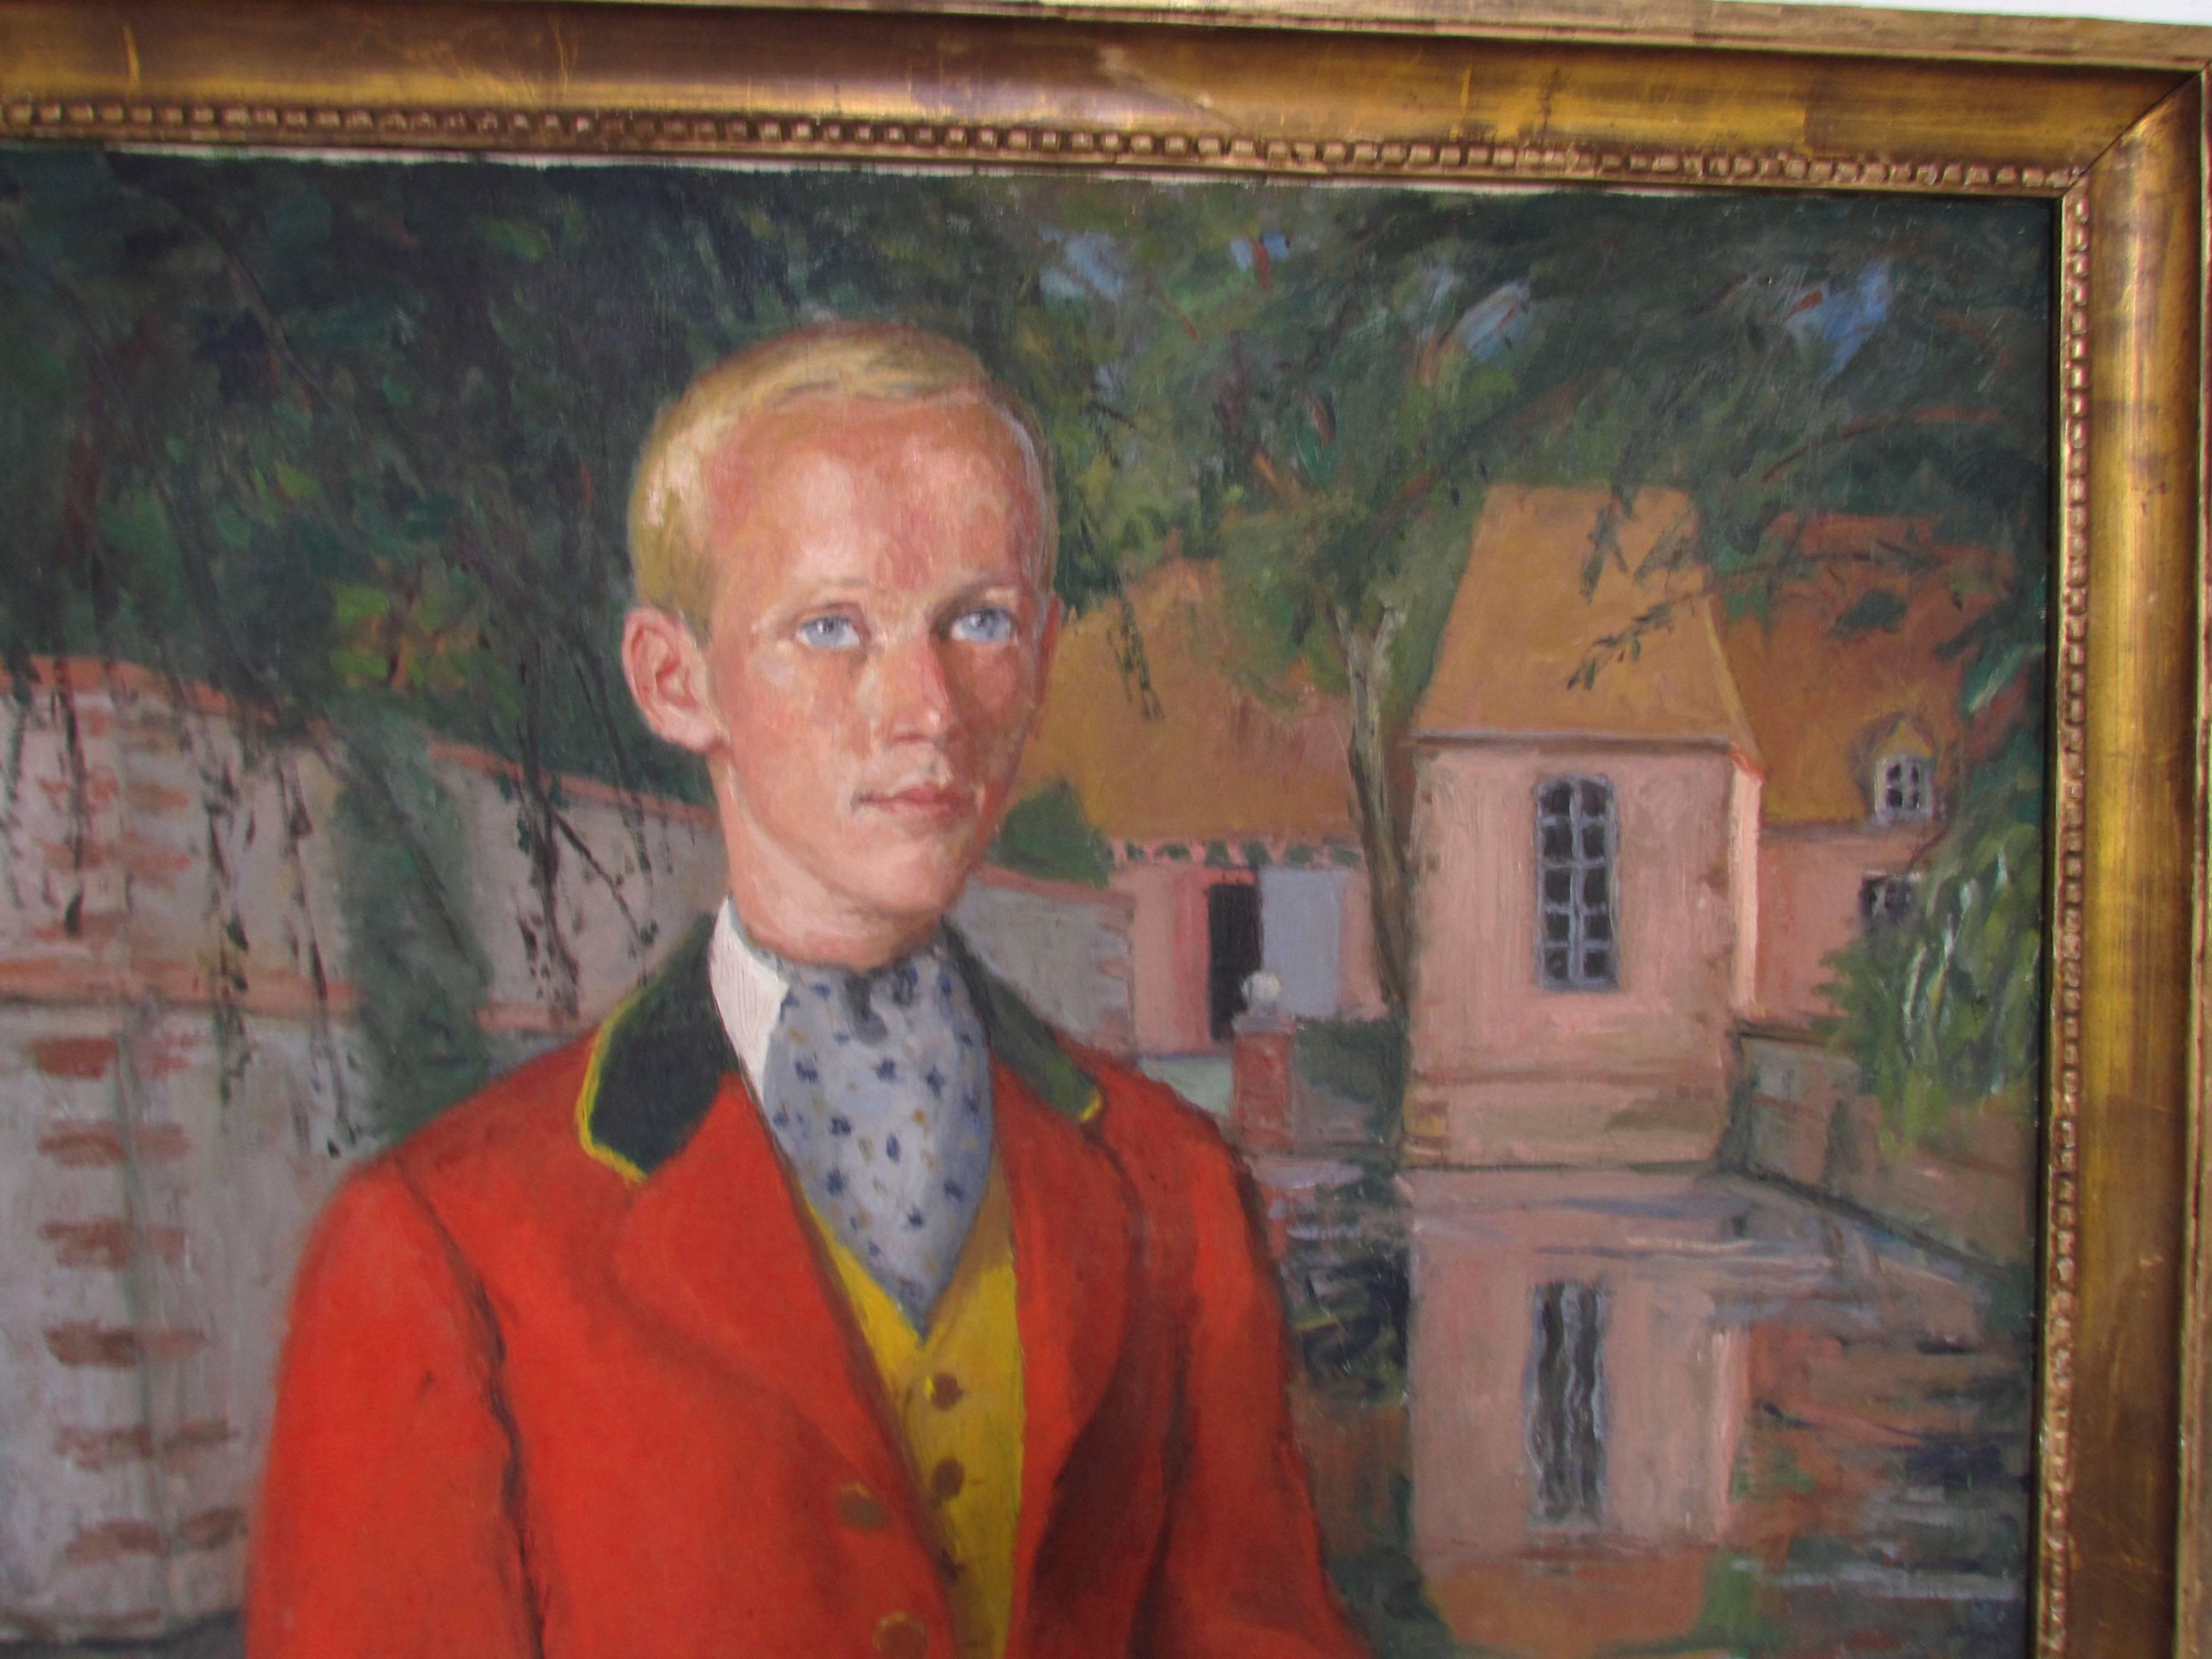 An important self portrait of the artist Pierre Deval, (1897-1993) as a young romantic landowner in the 1920s posing in riding attire at his newly purchased 17th century bastide (or castle) Domaine d’Orves in southern France. The property and